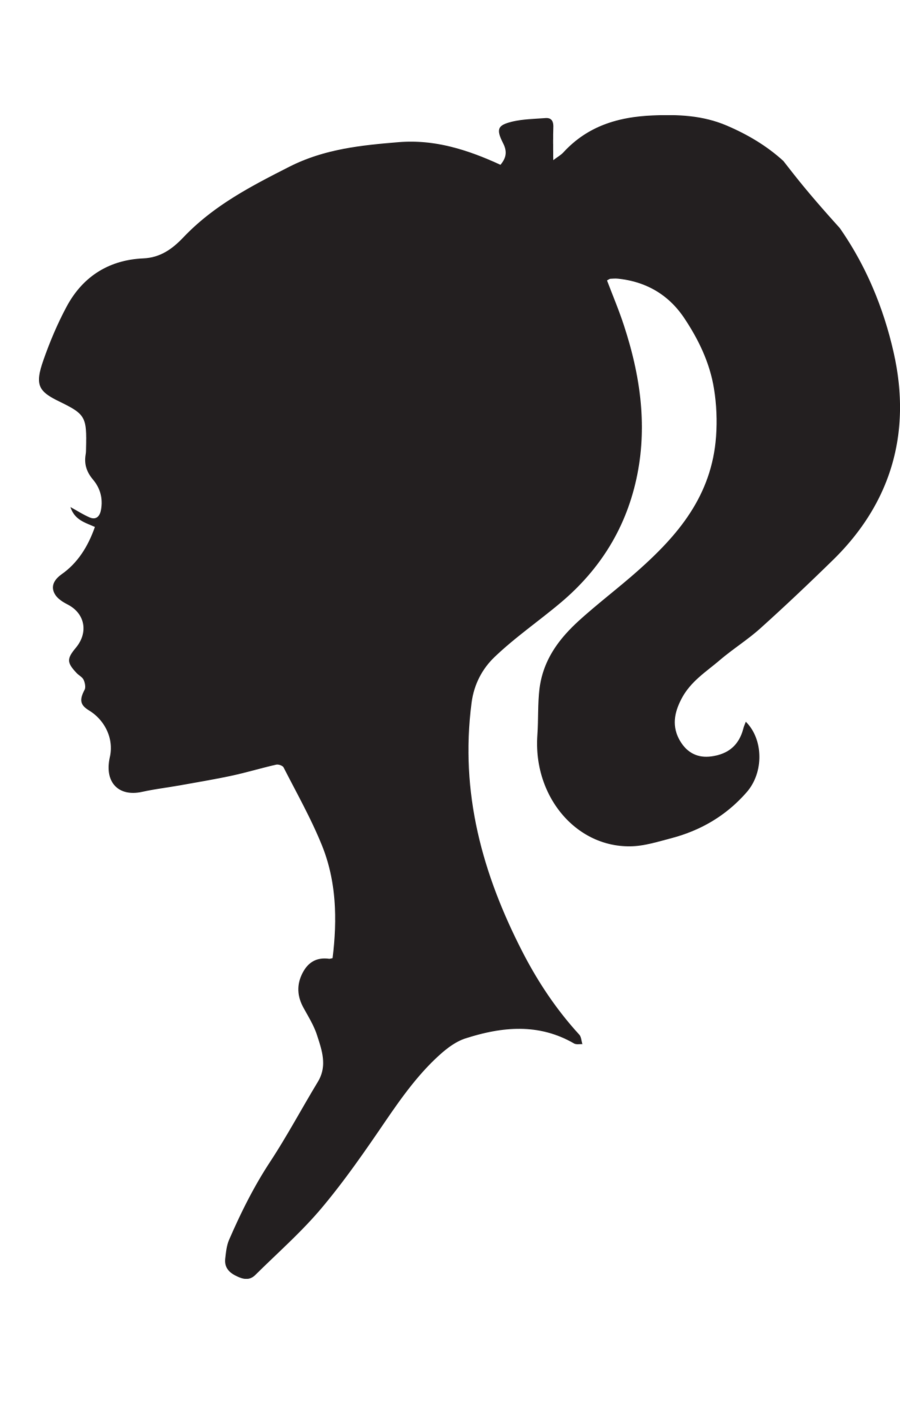 Female silhouette by snicklefritz. Jewelry clipart lady profile